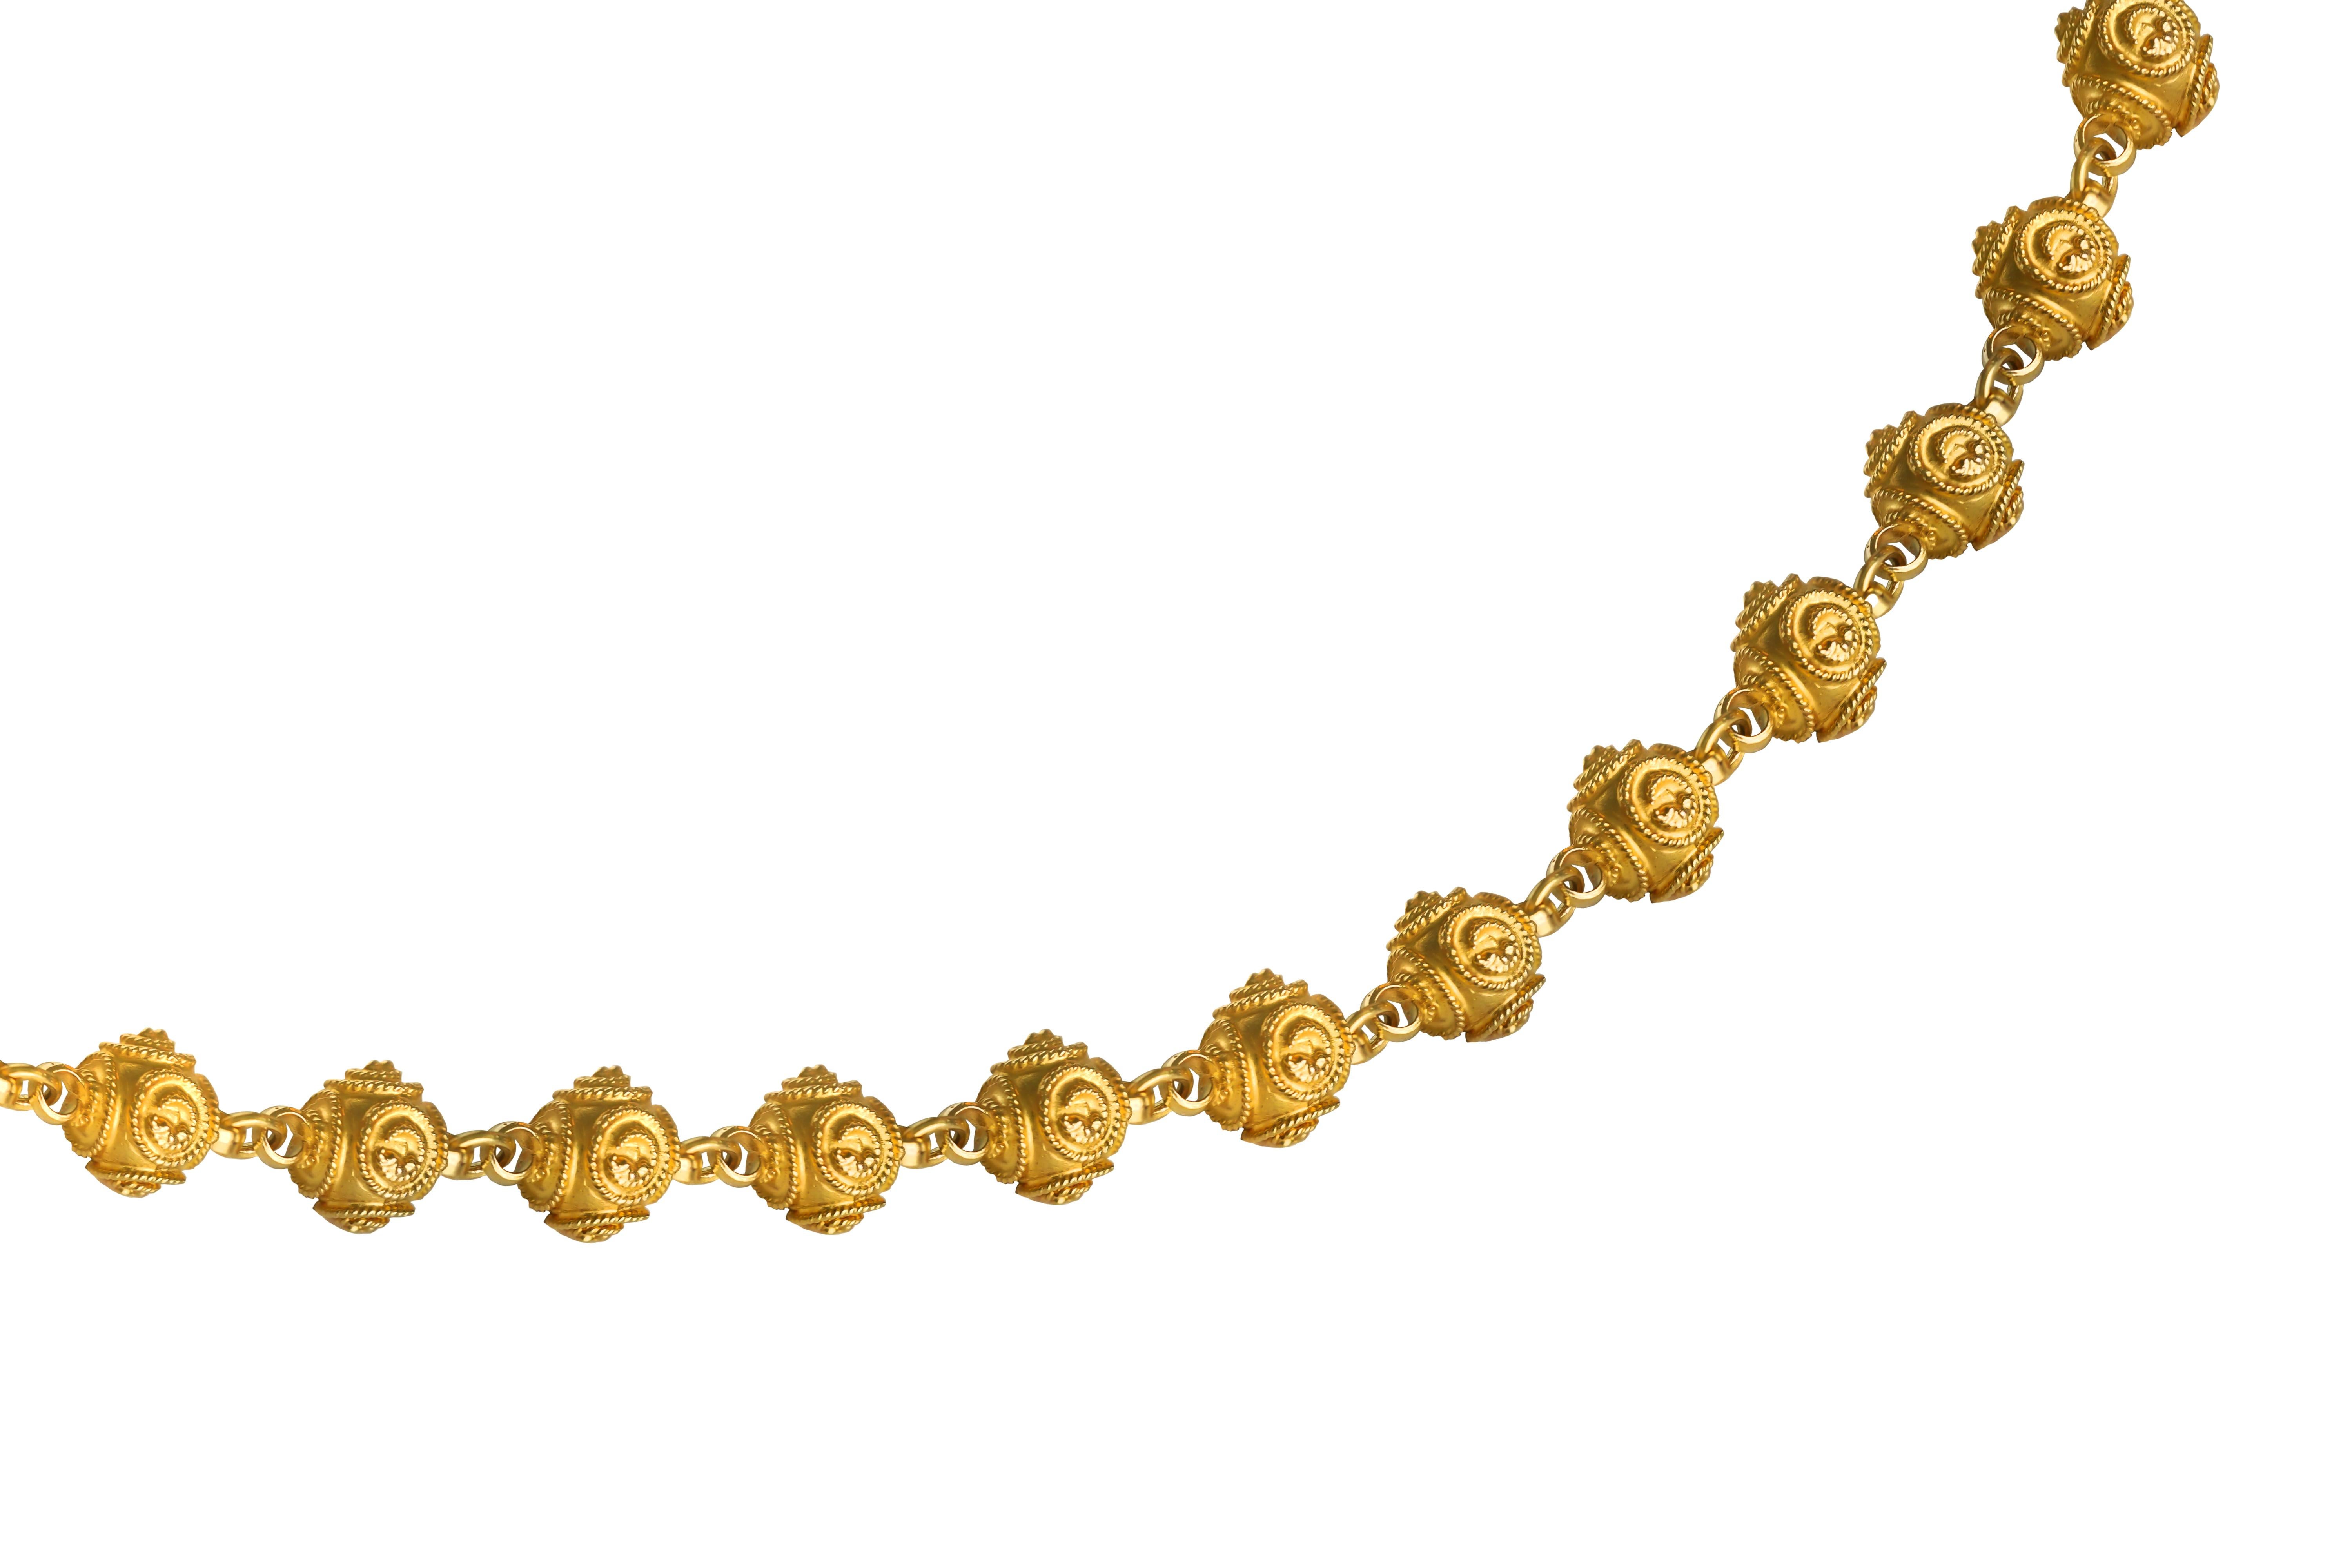 18K Yellow Gold Bead Etruscan Revival Necklace In Excellent Condition For Sale In West Palm Beach, FL